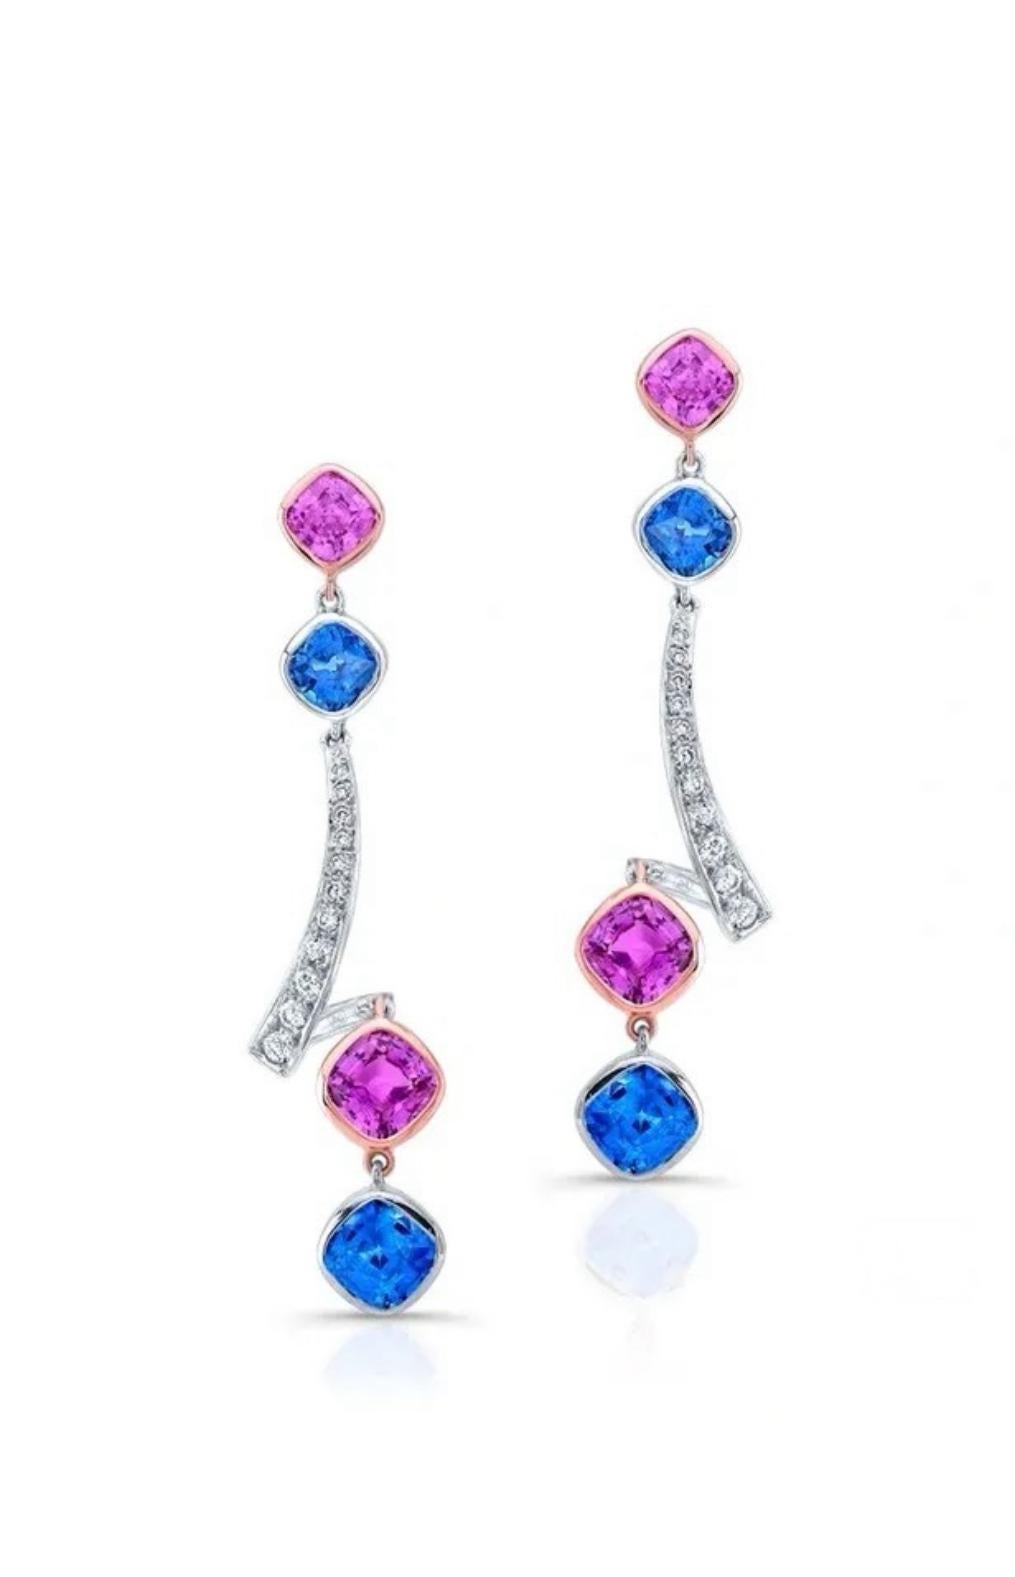 Modern Cushion-cut, Pink and blue Ceylon Sapphire earrings. 7.59 carats. For Sale